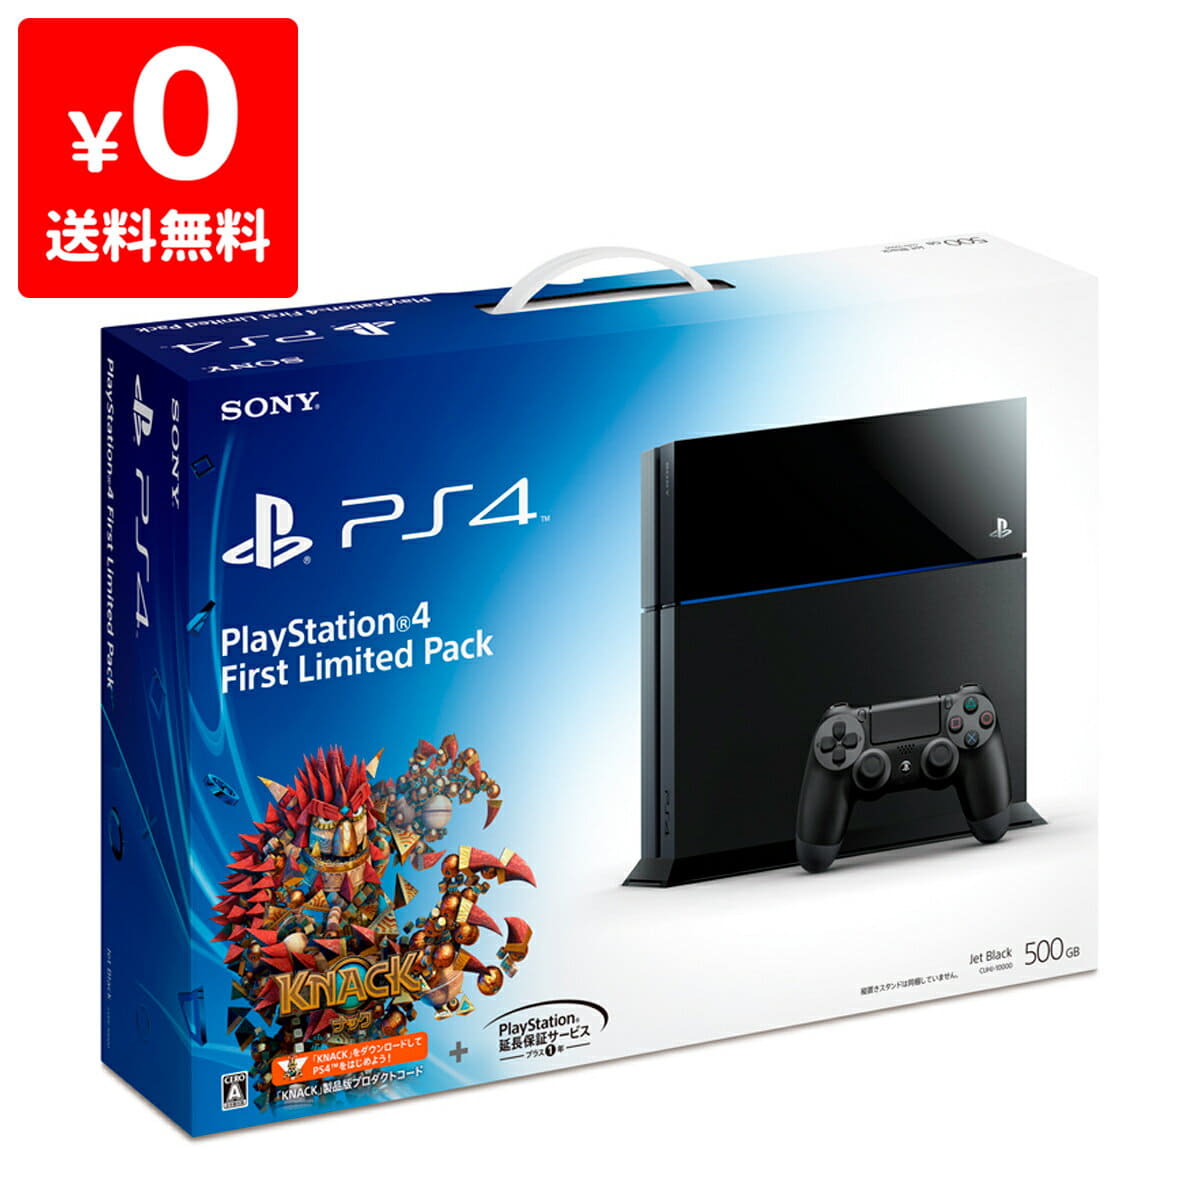 Used Ps4 Playstation 4 Playstation 4 First Limited Pack Hontaikanhingaihakofu Comes Playstation4 Sony Sony Be Forward Store